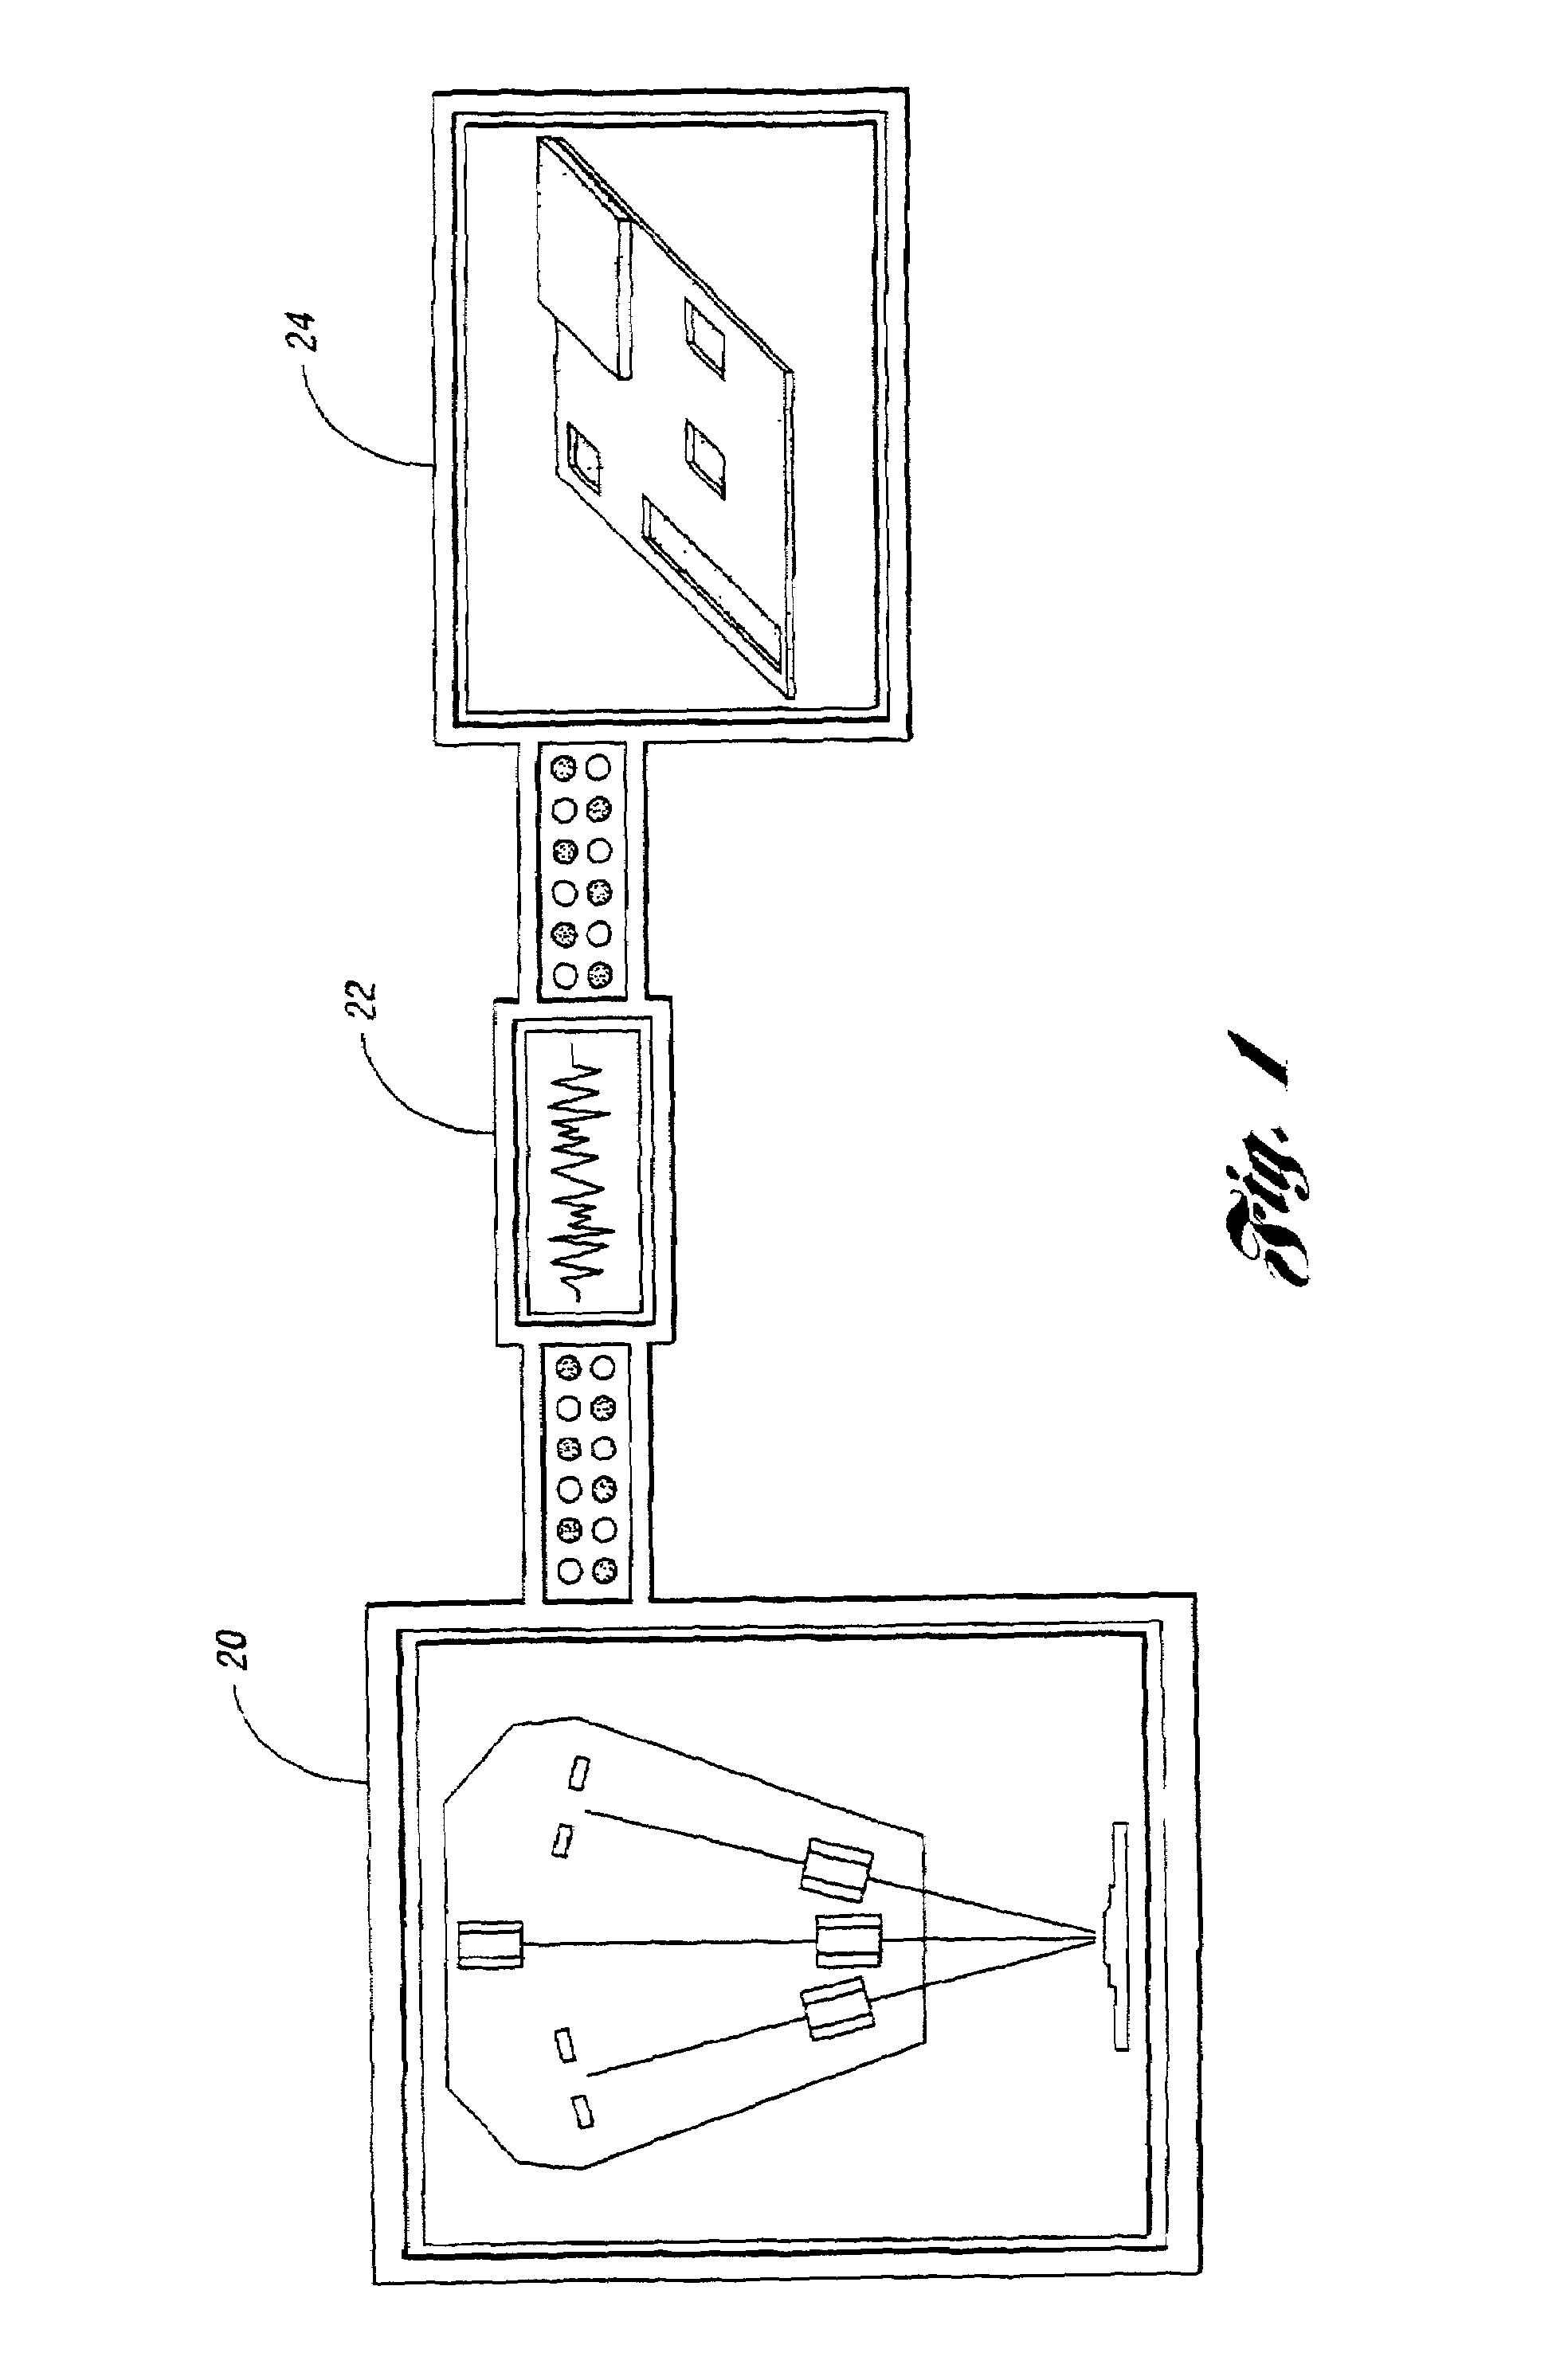 Method and system for inspecting electronic components mounted on printed circuit boards